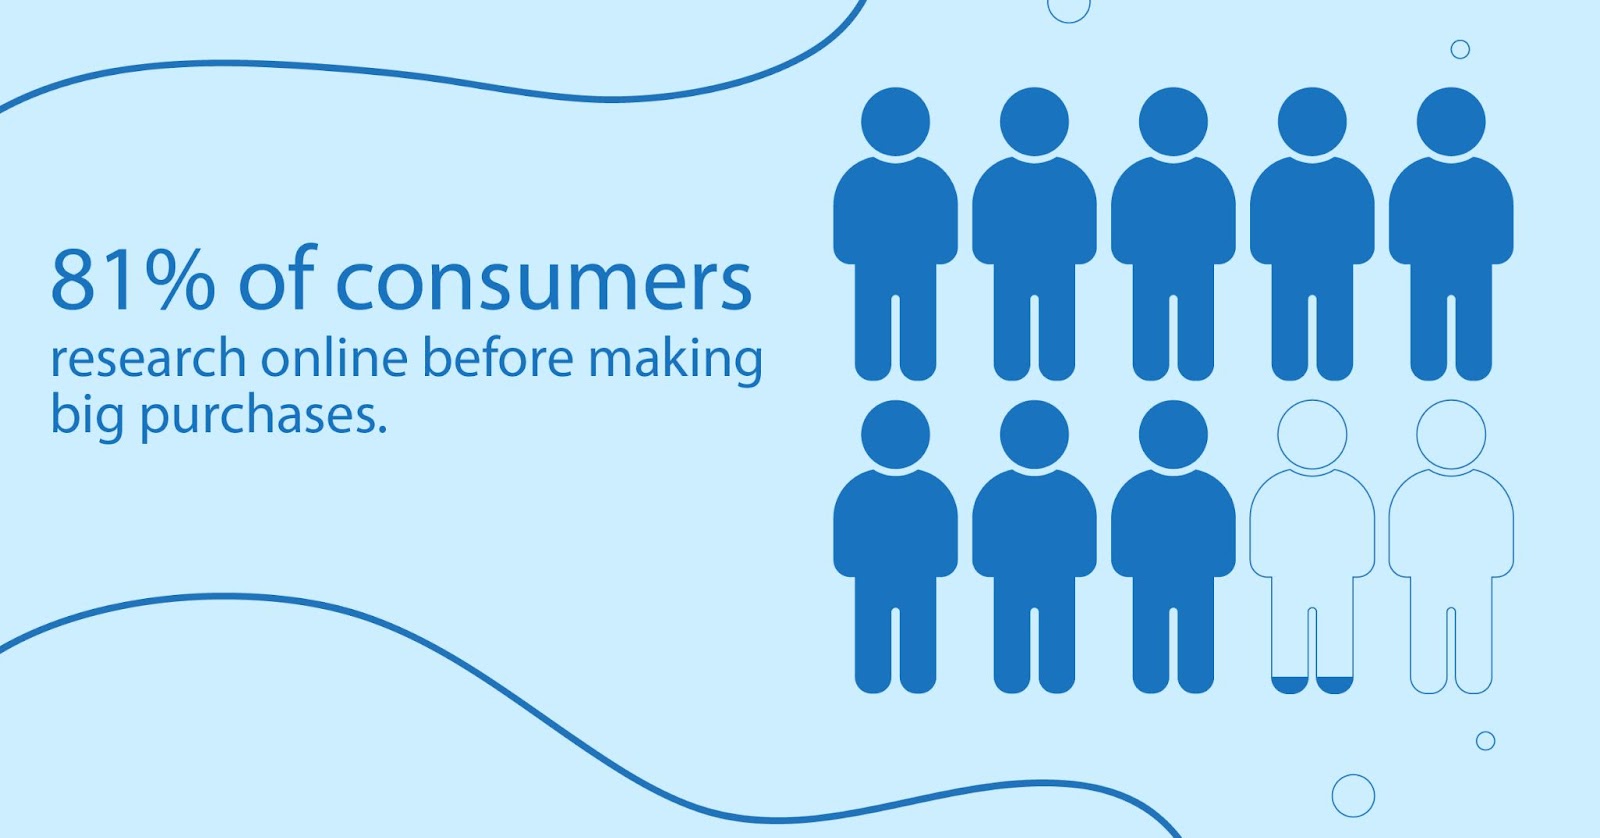 81% of consumers research online before making big purchases